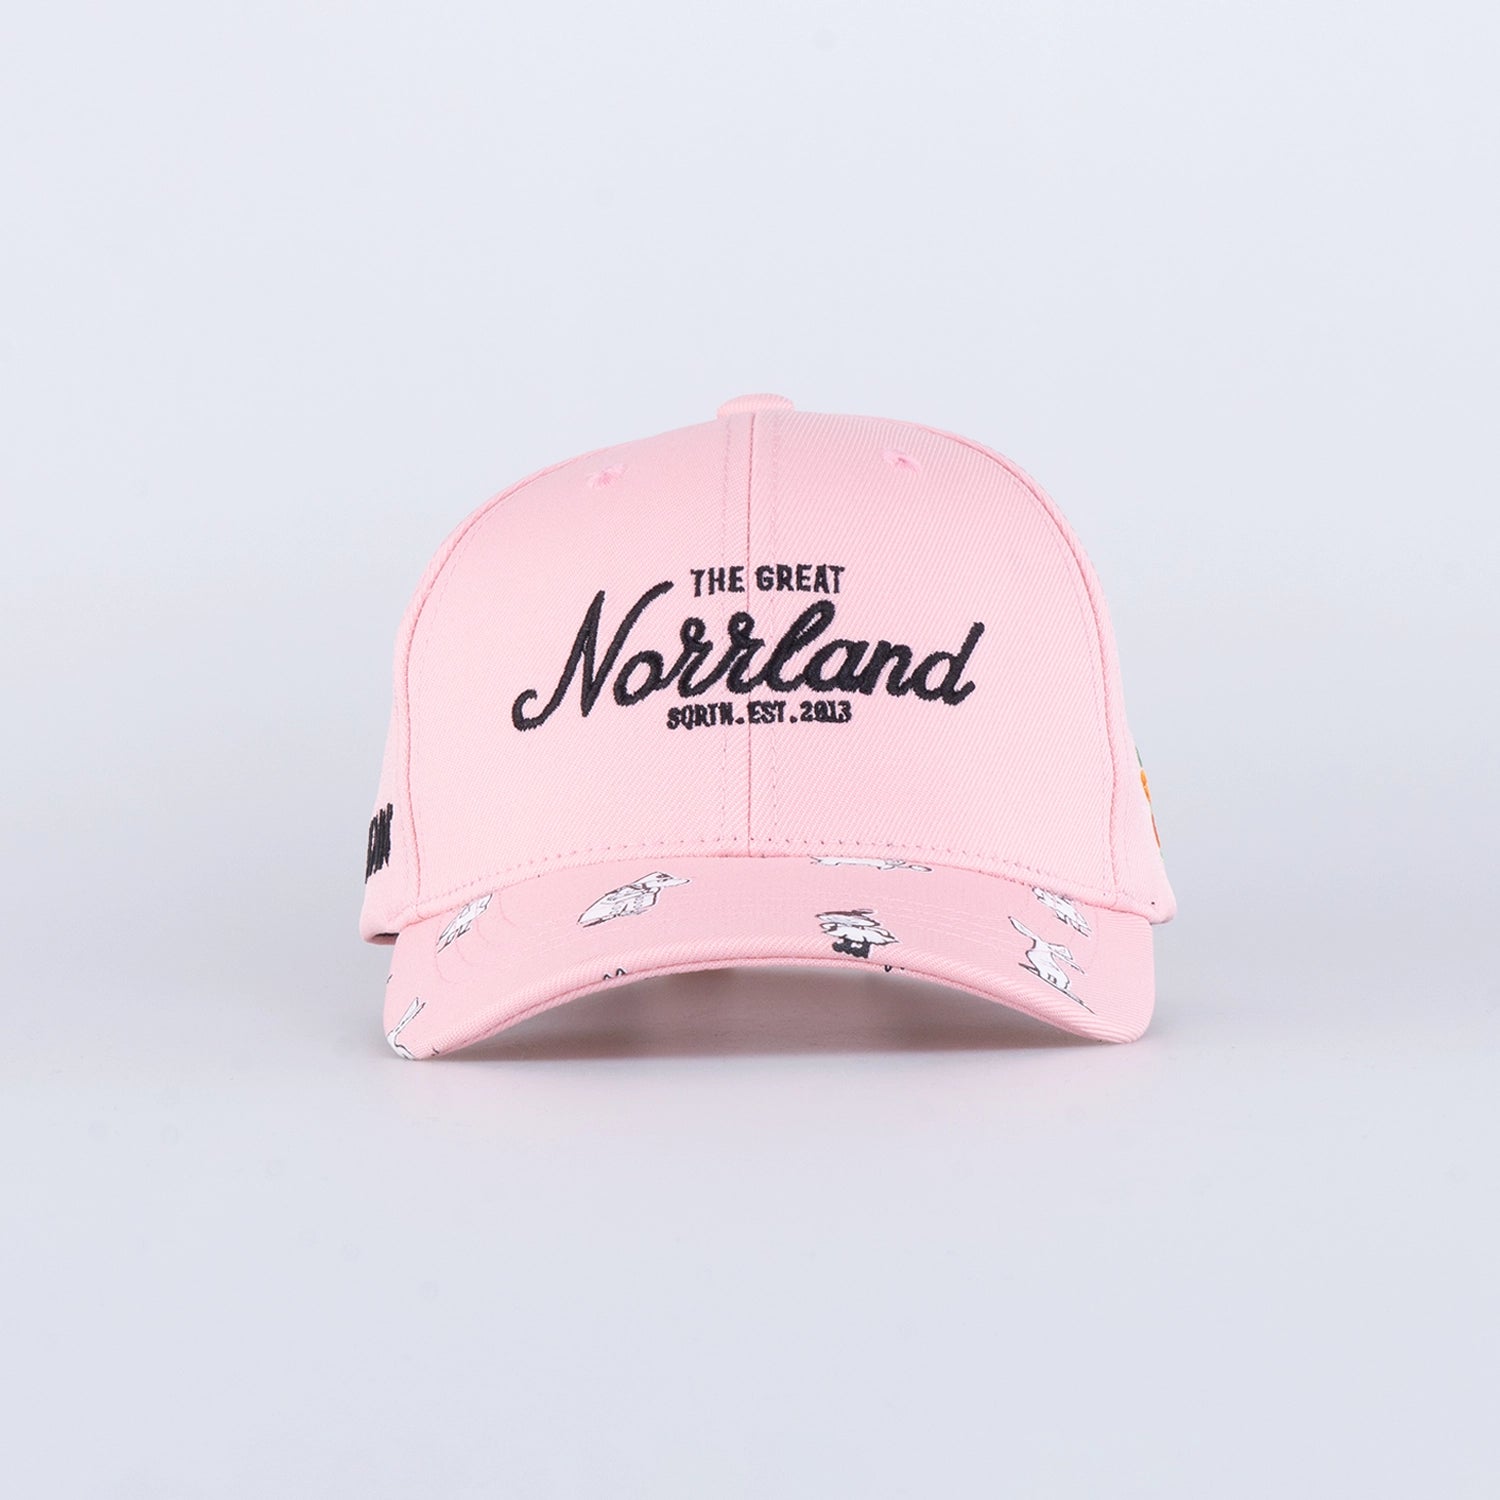 GREAT NORRLAND KIDS KEPS - HOOKED MUMIN PINK